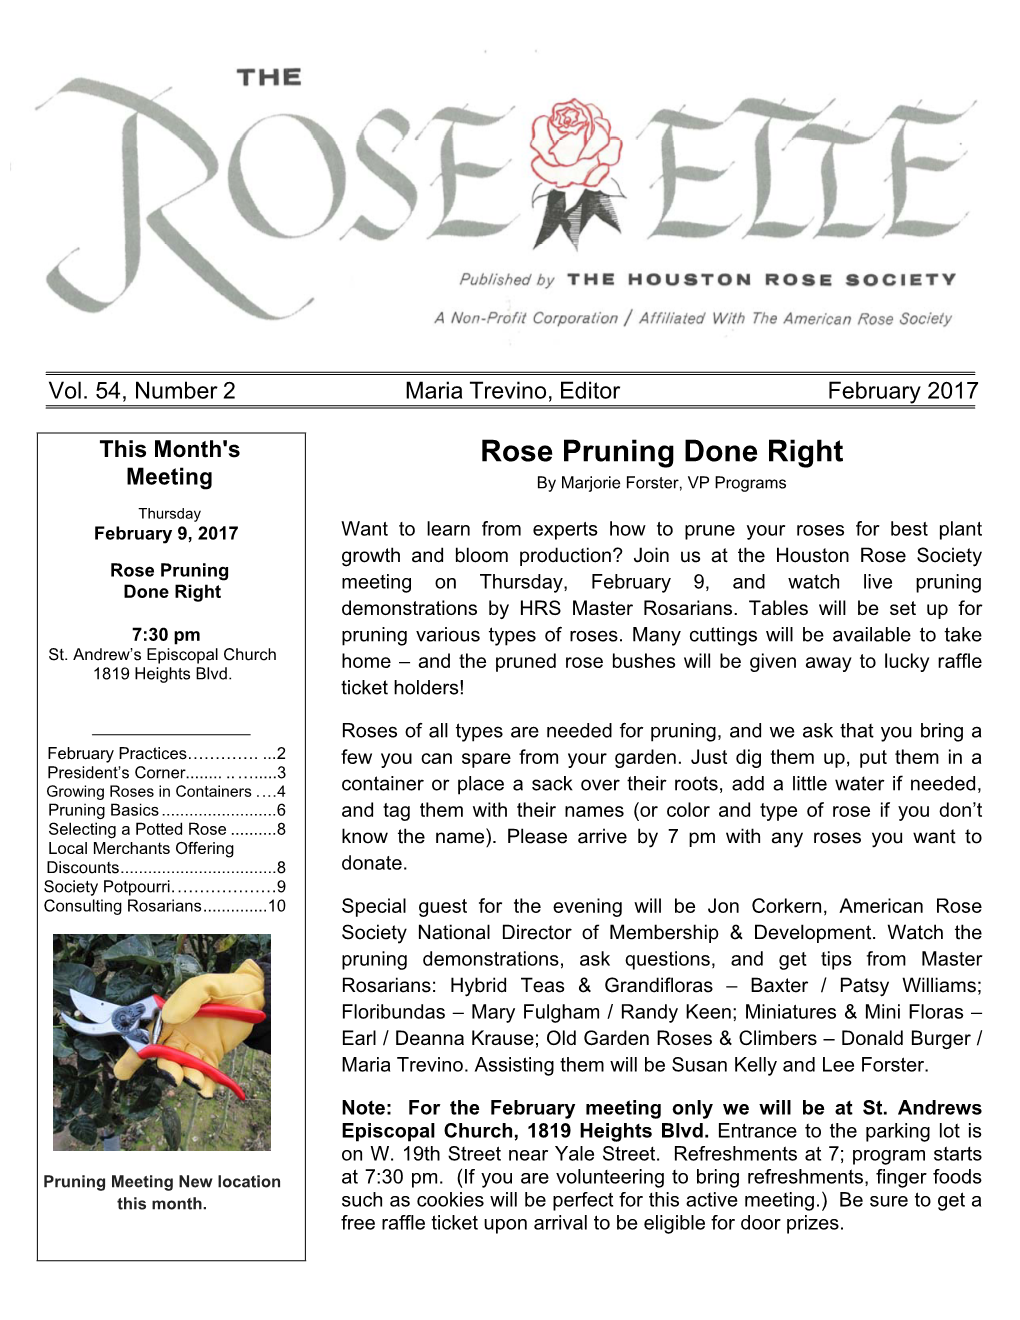 Rose Pruning Done Right Meeting by Marjorie Forster, VP Programs